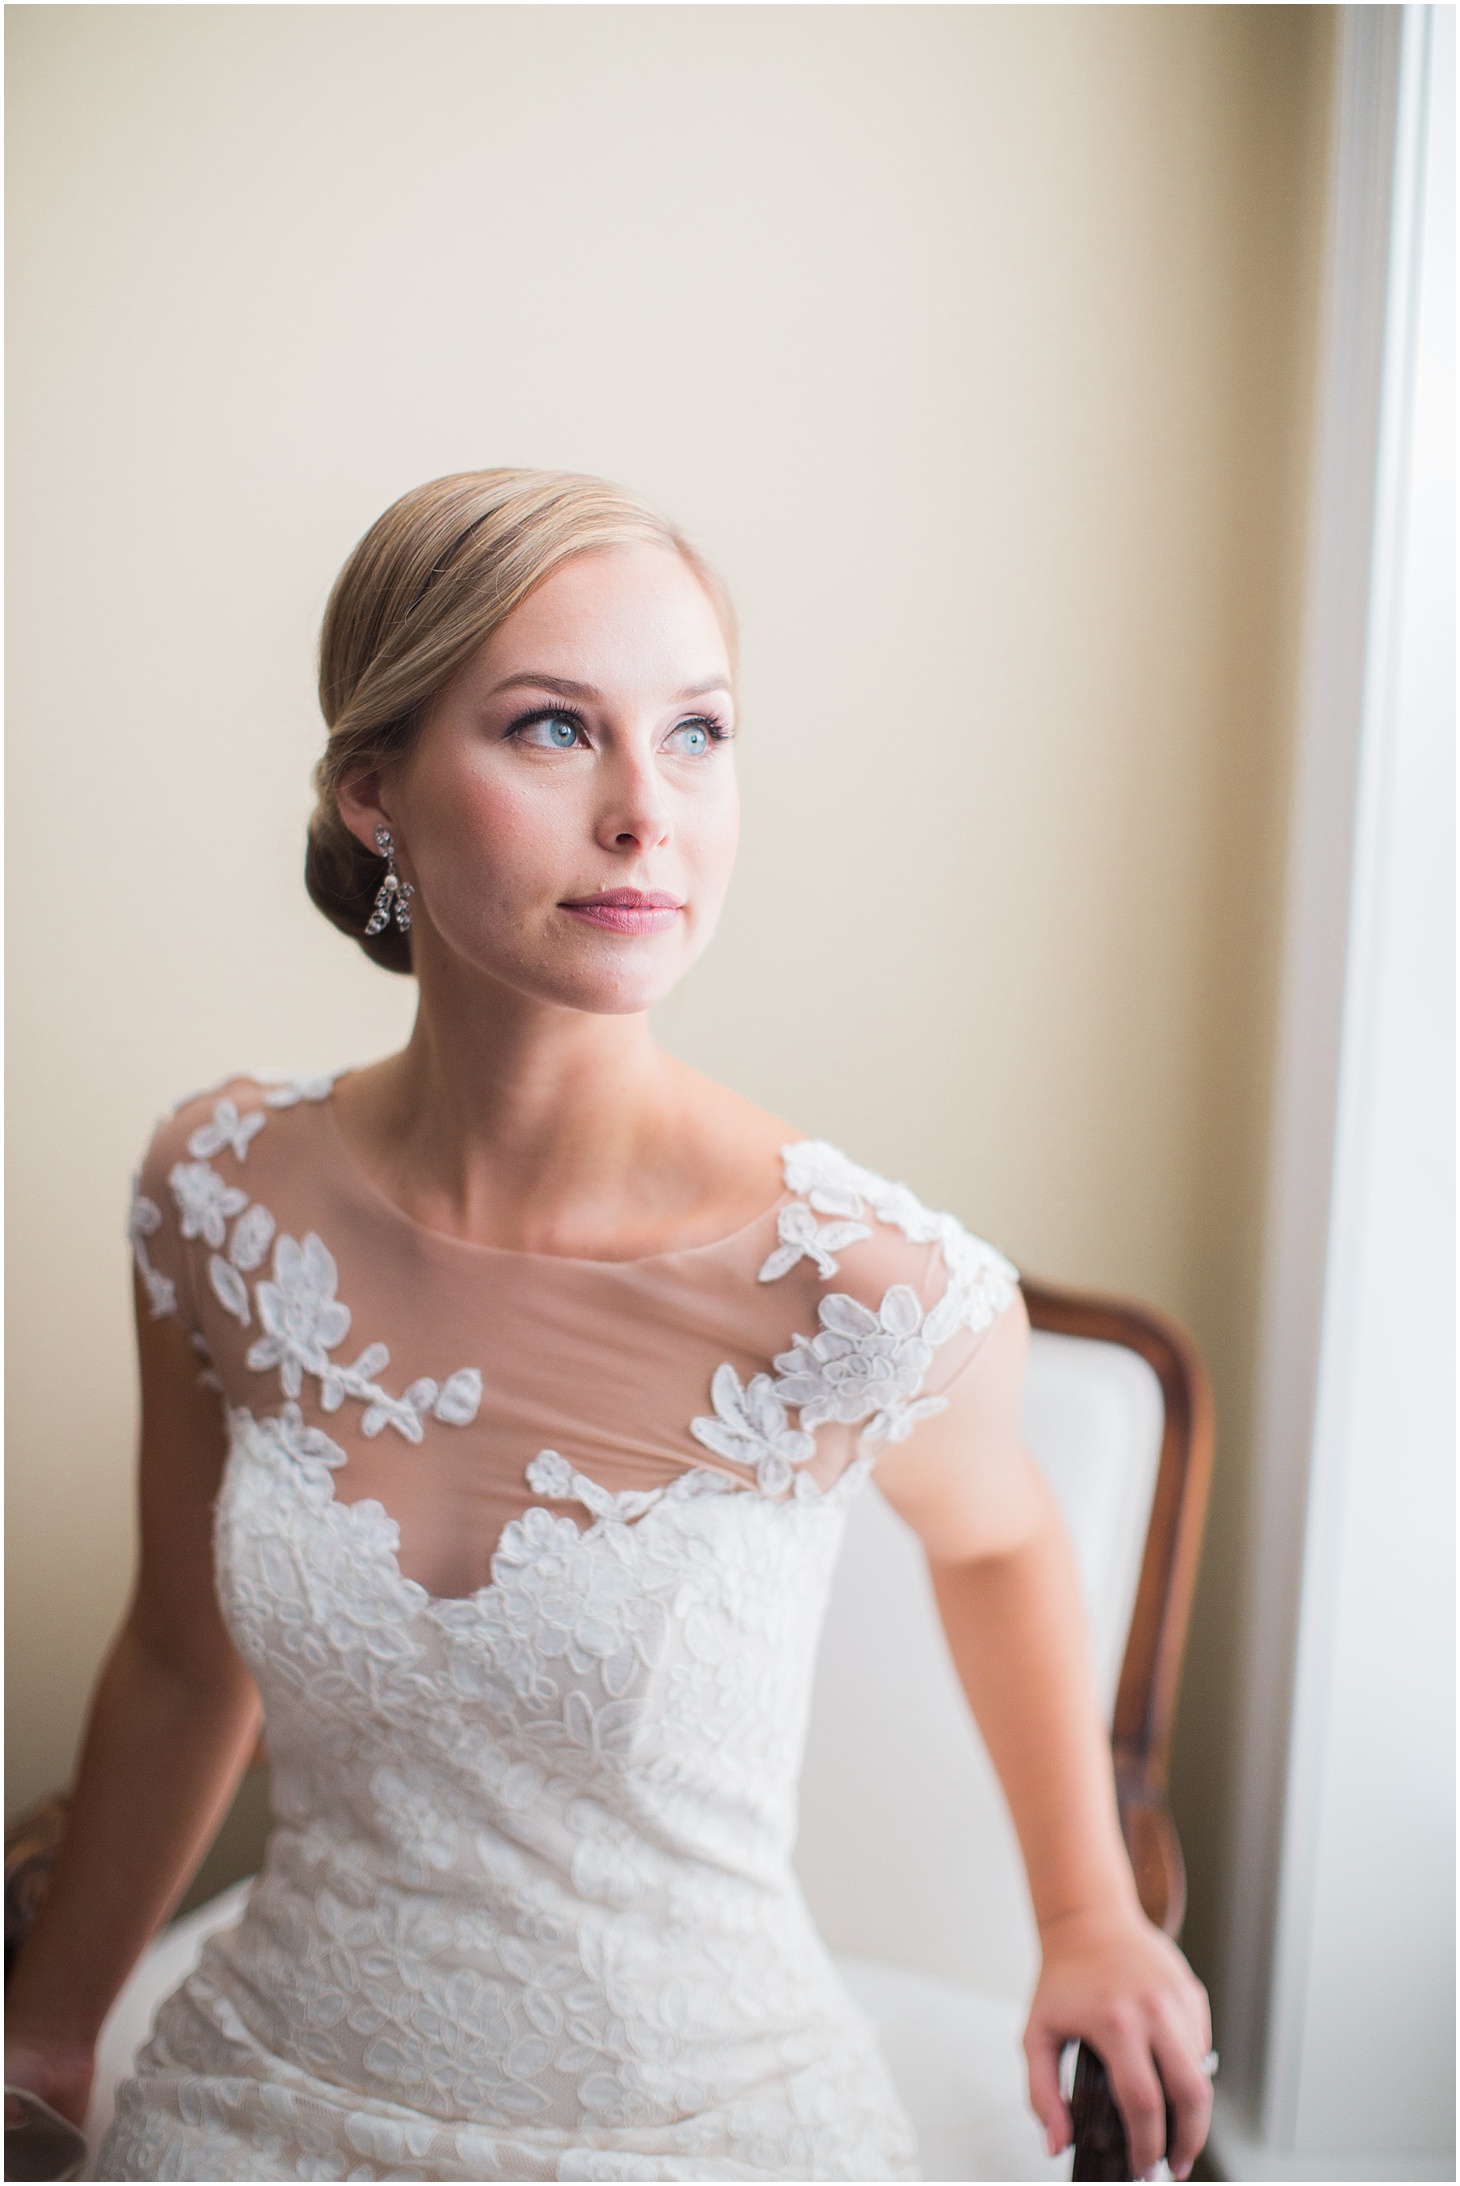 Bridal Portrait in Romona Keveza Gown | Wedding Ceremony at Old Presbyterian Meeting House | Southern Black Tie wedding at St. Regis DC in Dusty Blue and Ivory | Sarah Bradshaw Photography